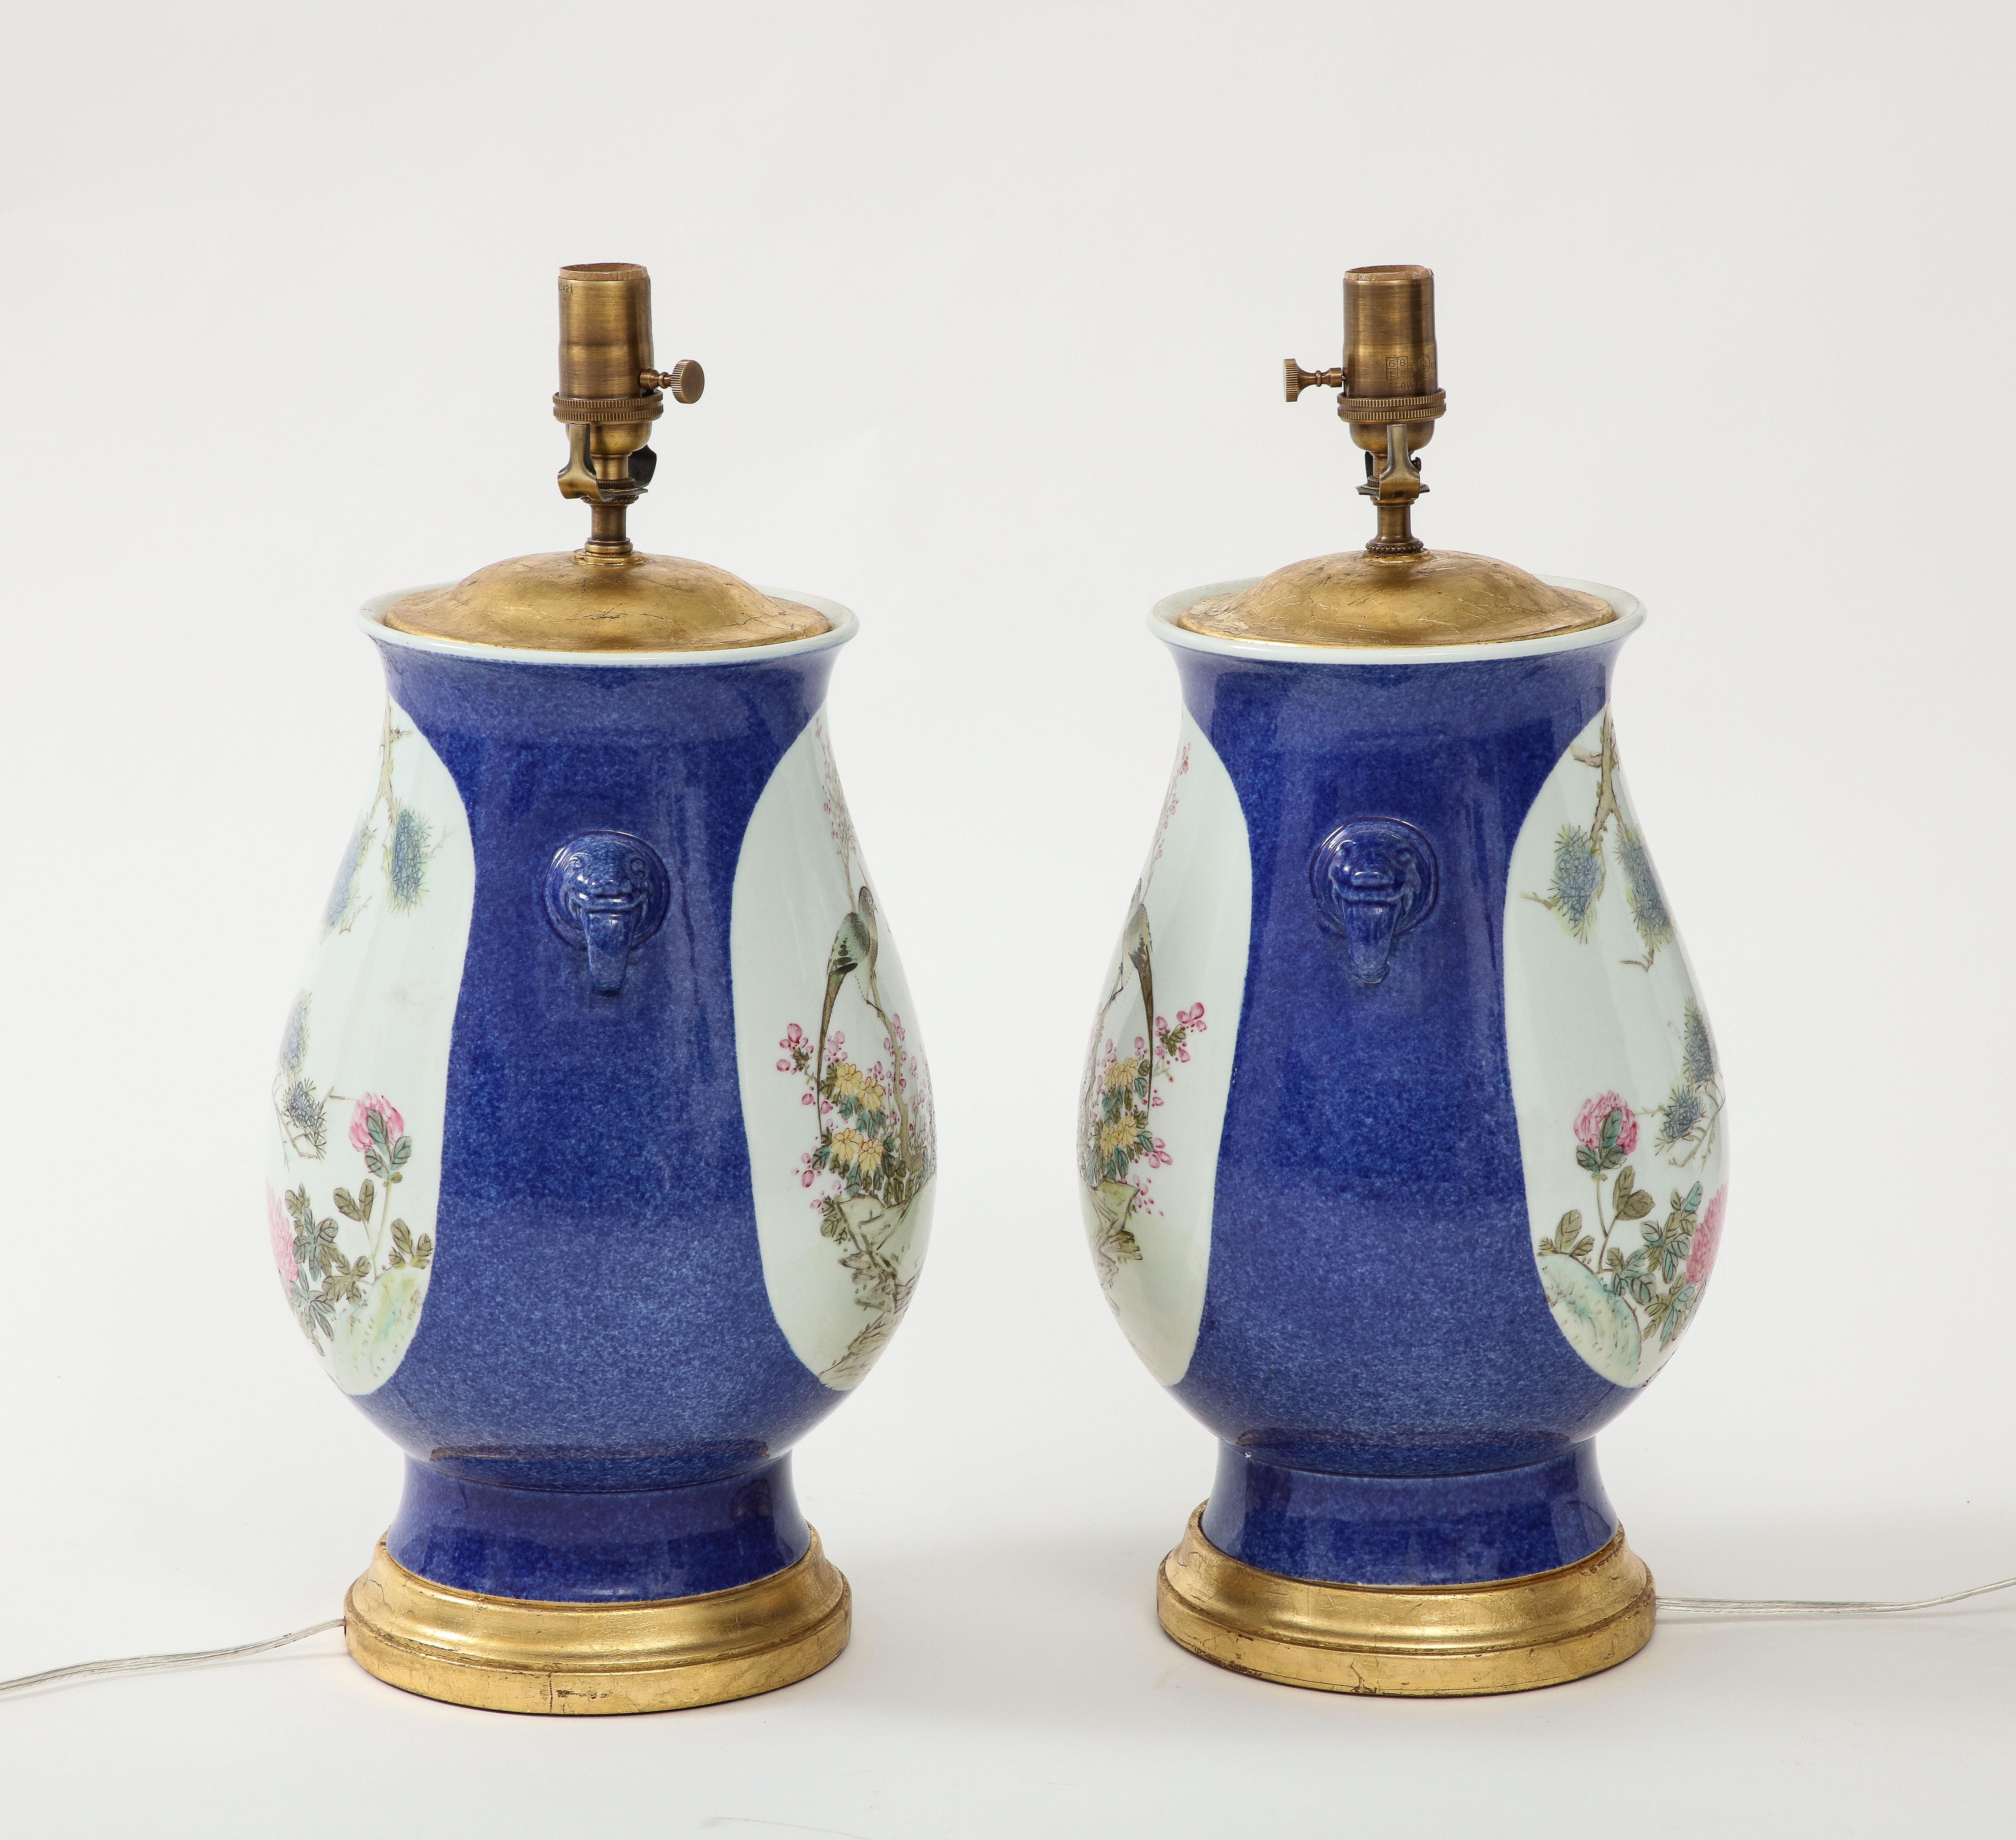 Pair of Chinese Porcelain Lamps 18